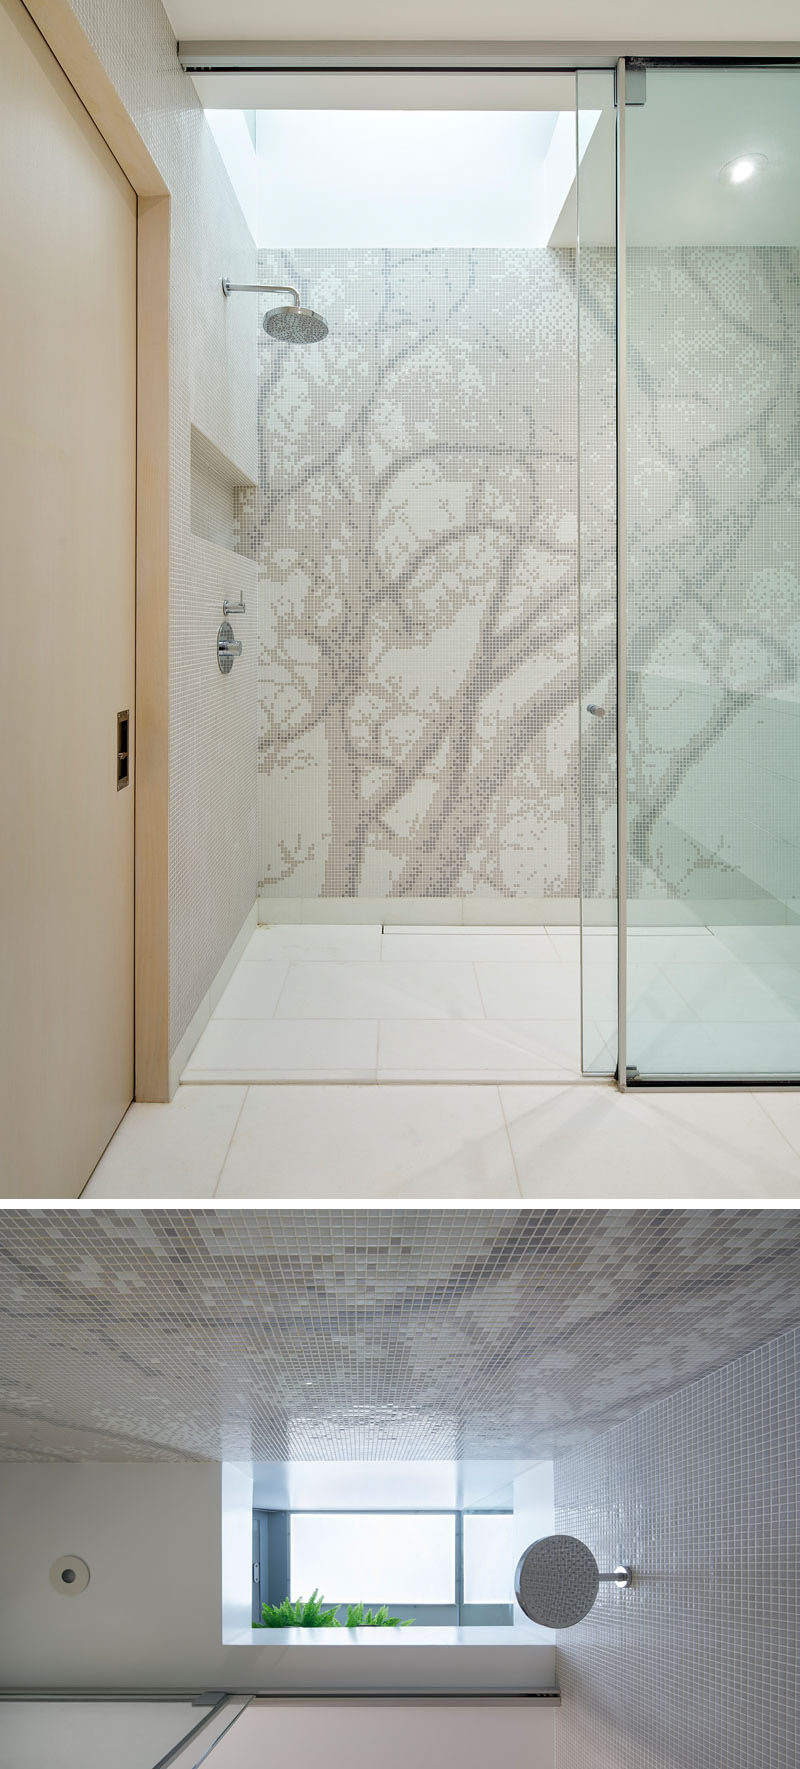 When you are in this shower, the steam from the shower collects on glass walls of a garden positioned directly above and waters the plants, which are partially visible from the shower below.